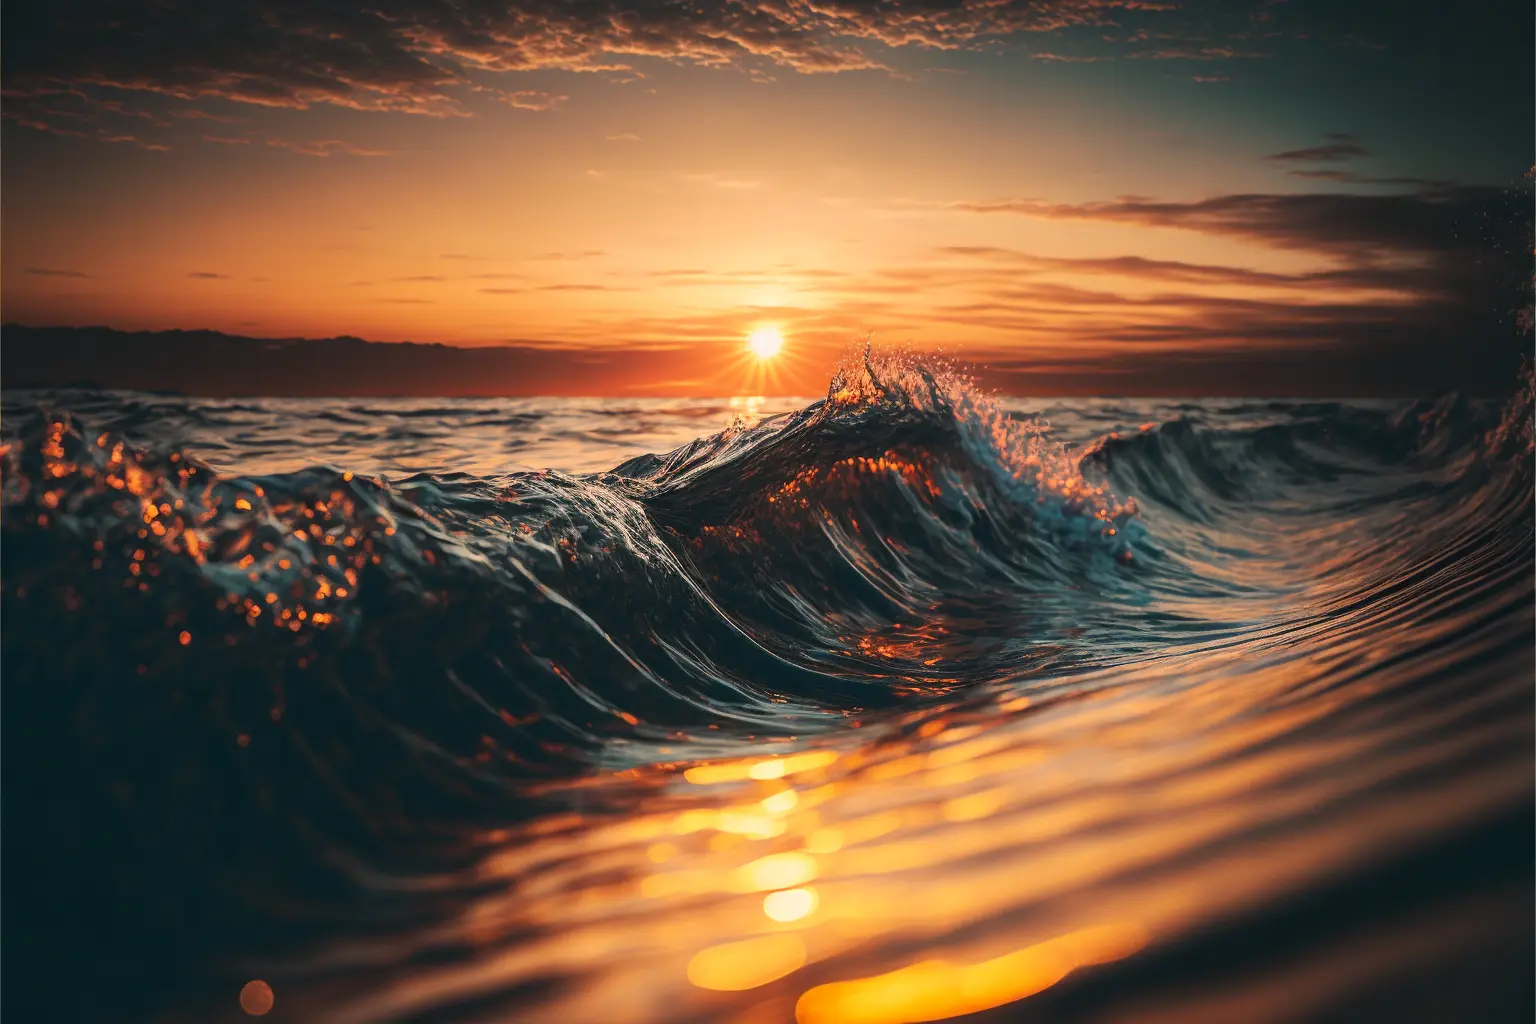 Sea of Endless waves with the sparkling reflection of the sun, golden hour, Canon RF 16mm f:2.8 STM Lens, hyperrealistic photography, style of unsplash and National Geographic